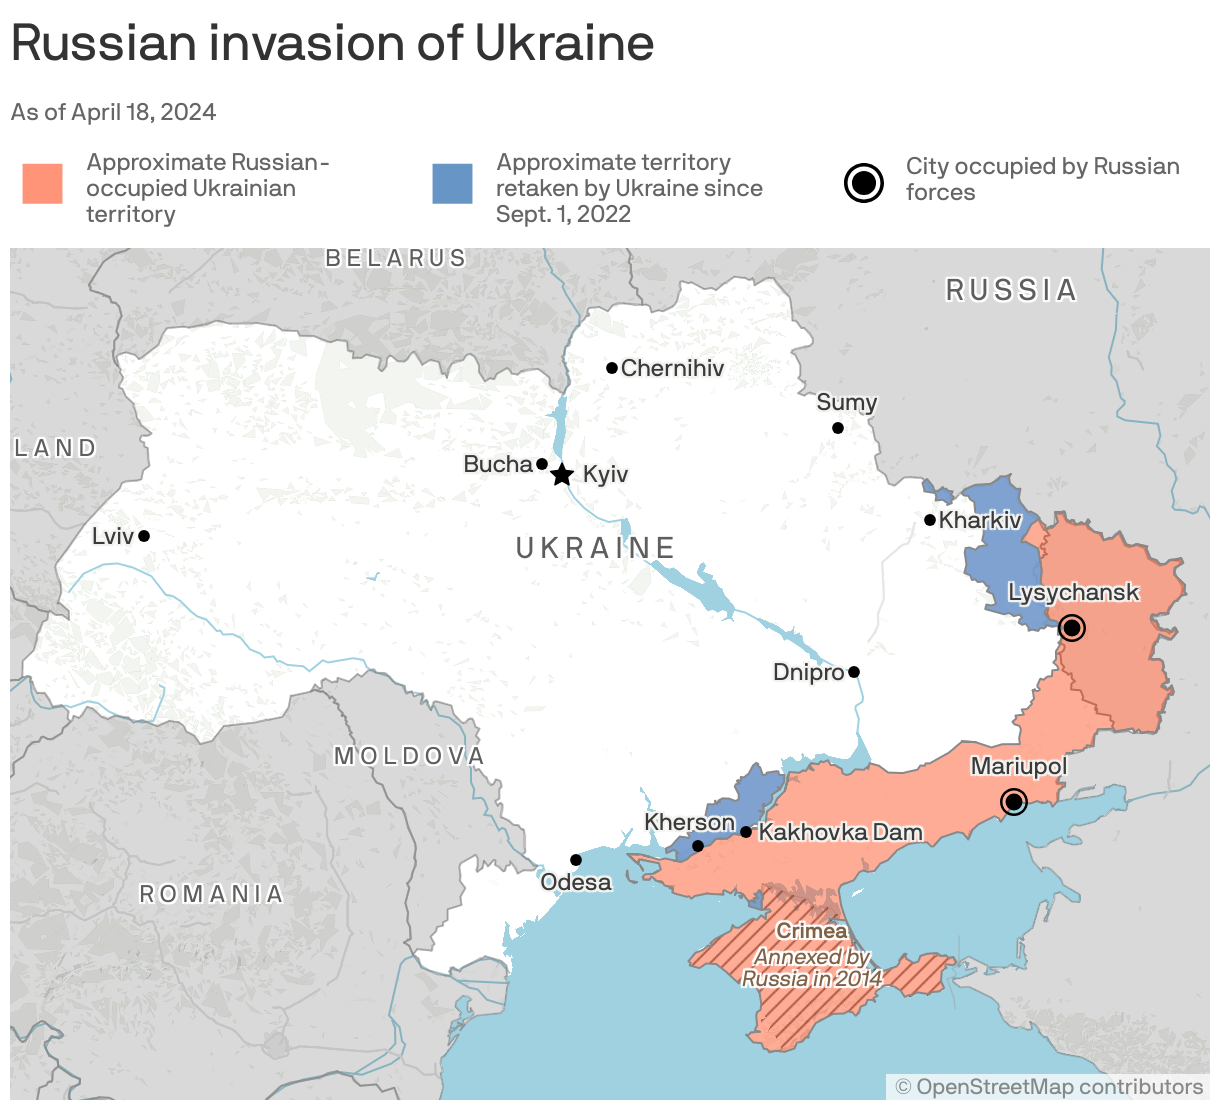 Russian invasion of Ukraine, as of March 3